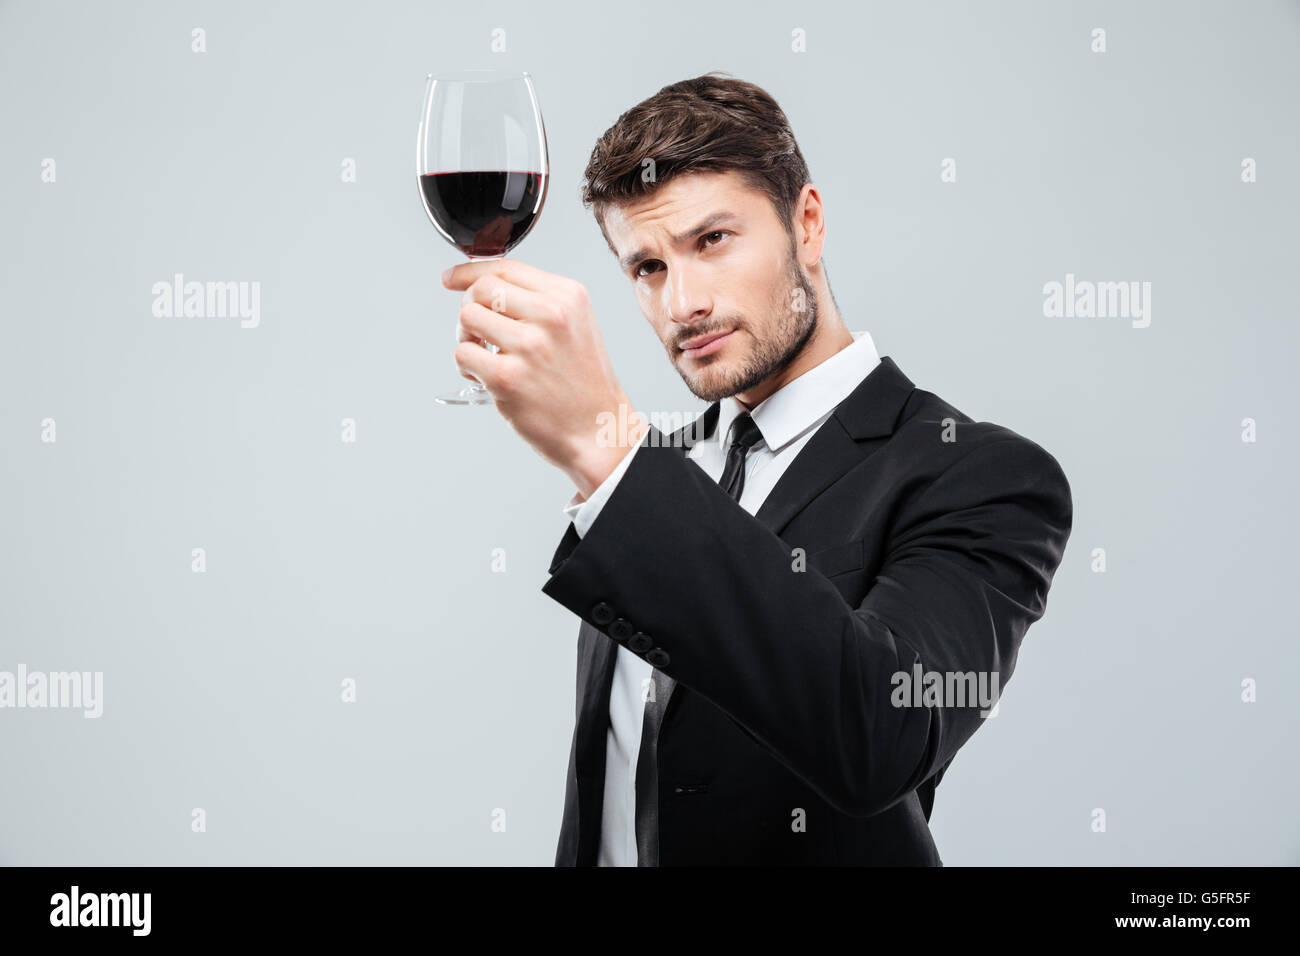 Concentrated young man sommelier tasting and looking at red wine in glass over white background Stock Photo